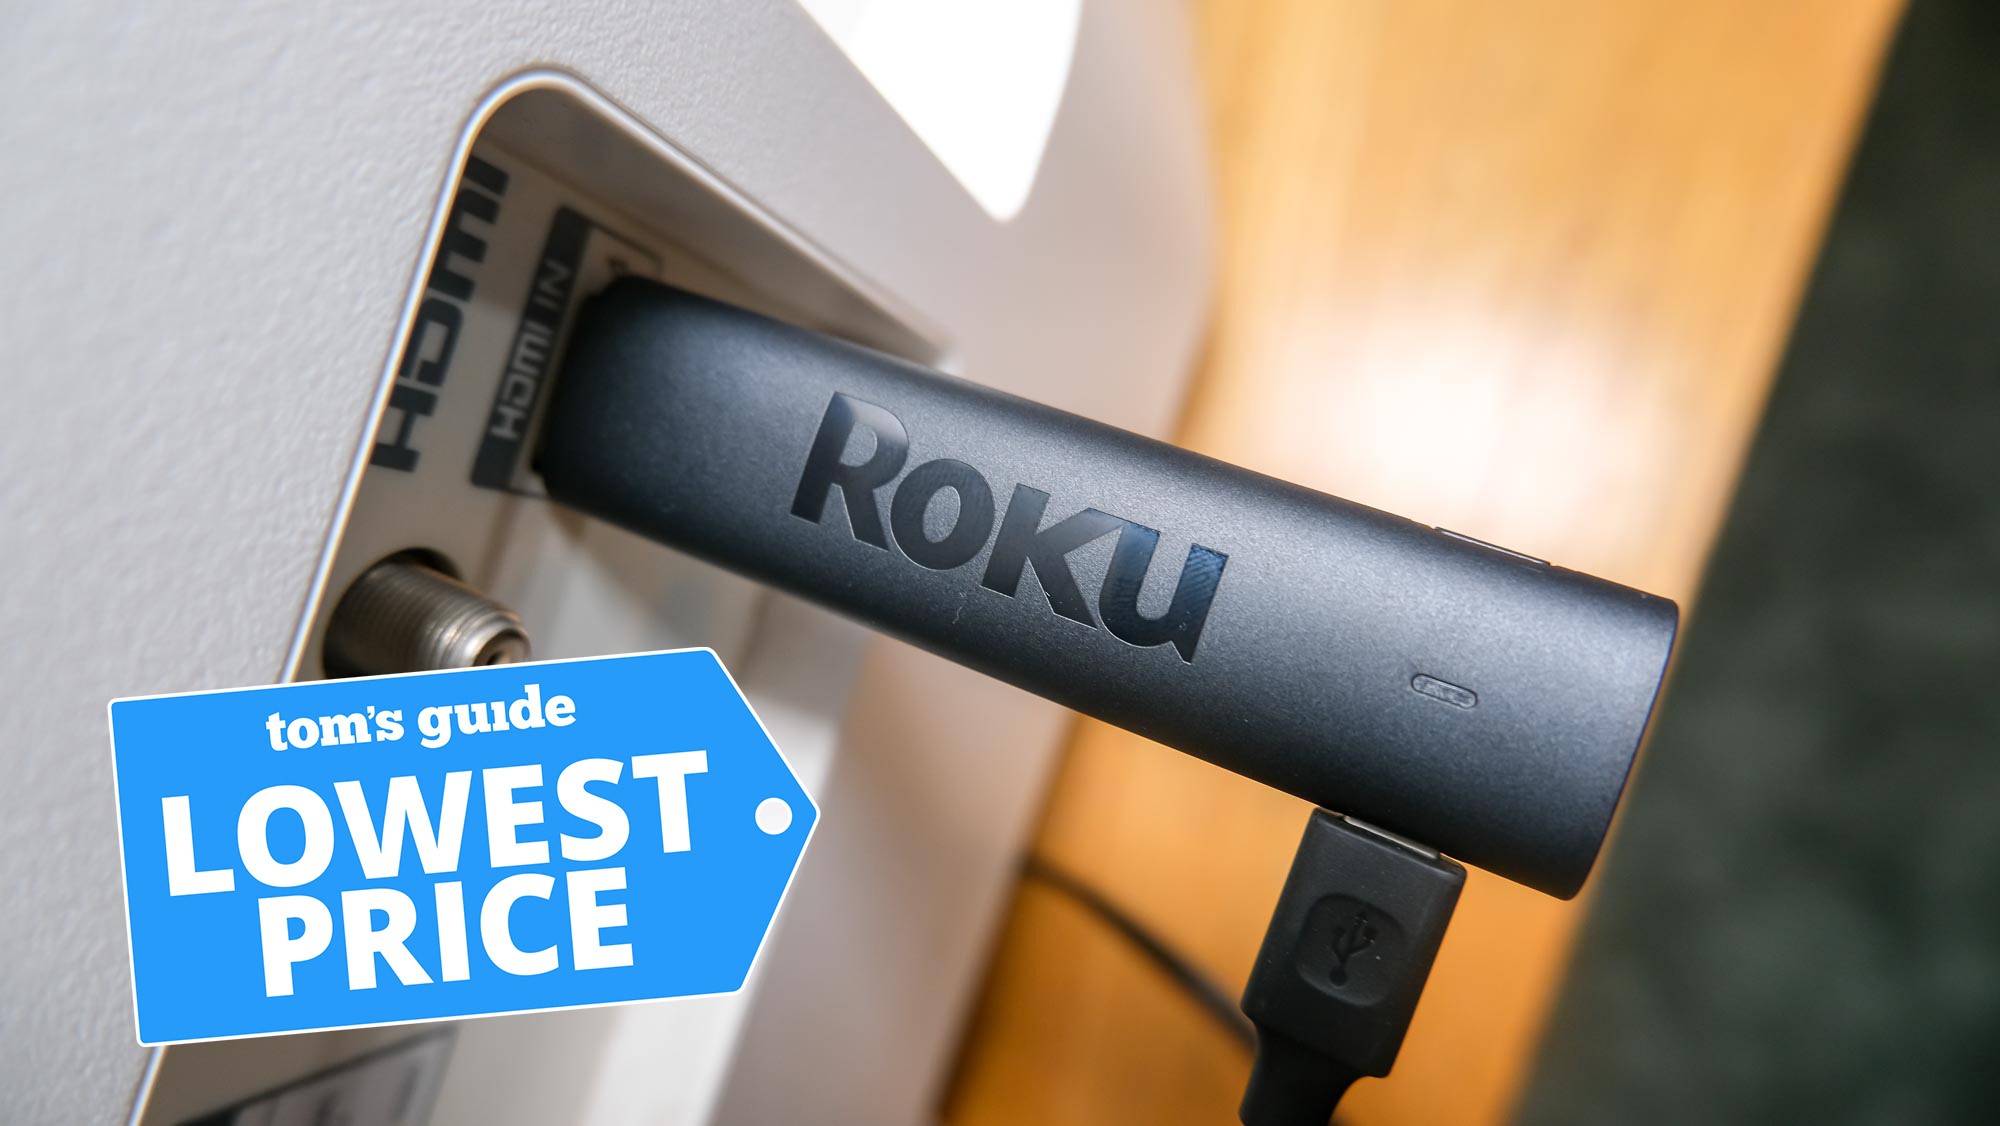 The Roku Streaming Stick 4K plugged into an HDMI port, with a Tom's Guide Lowest Price graphic above